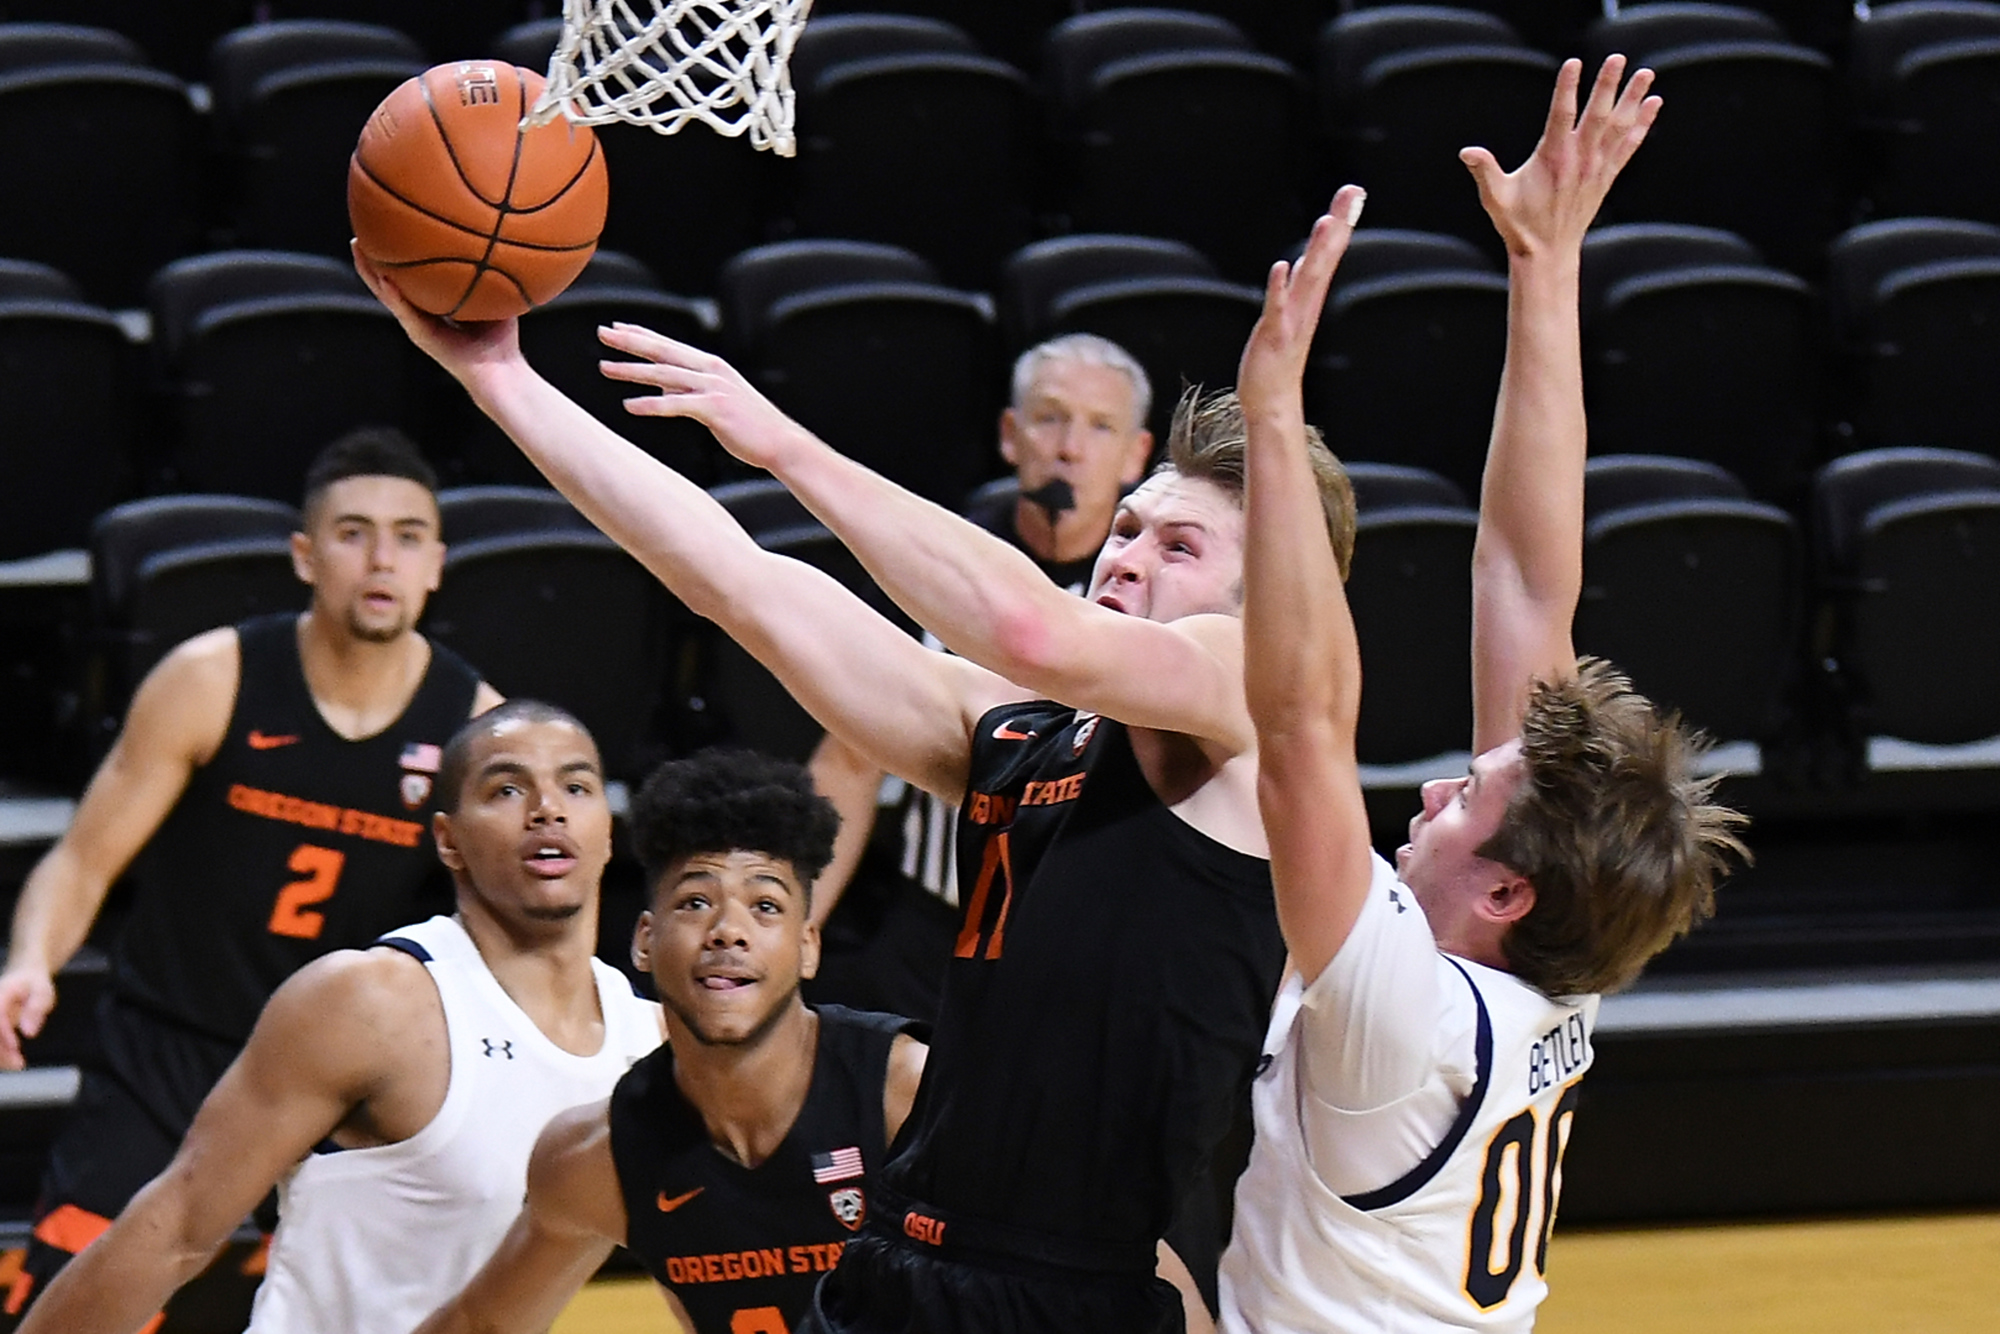 Oregon State men’s basketball appreciates returning to action, and a 71-63 win over California